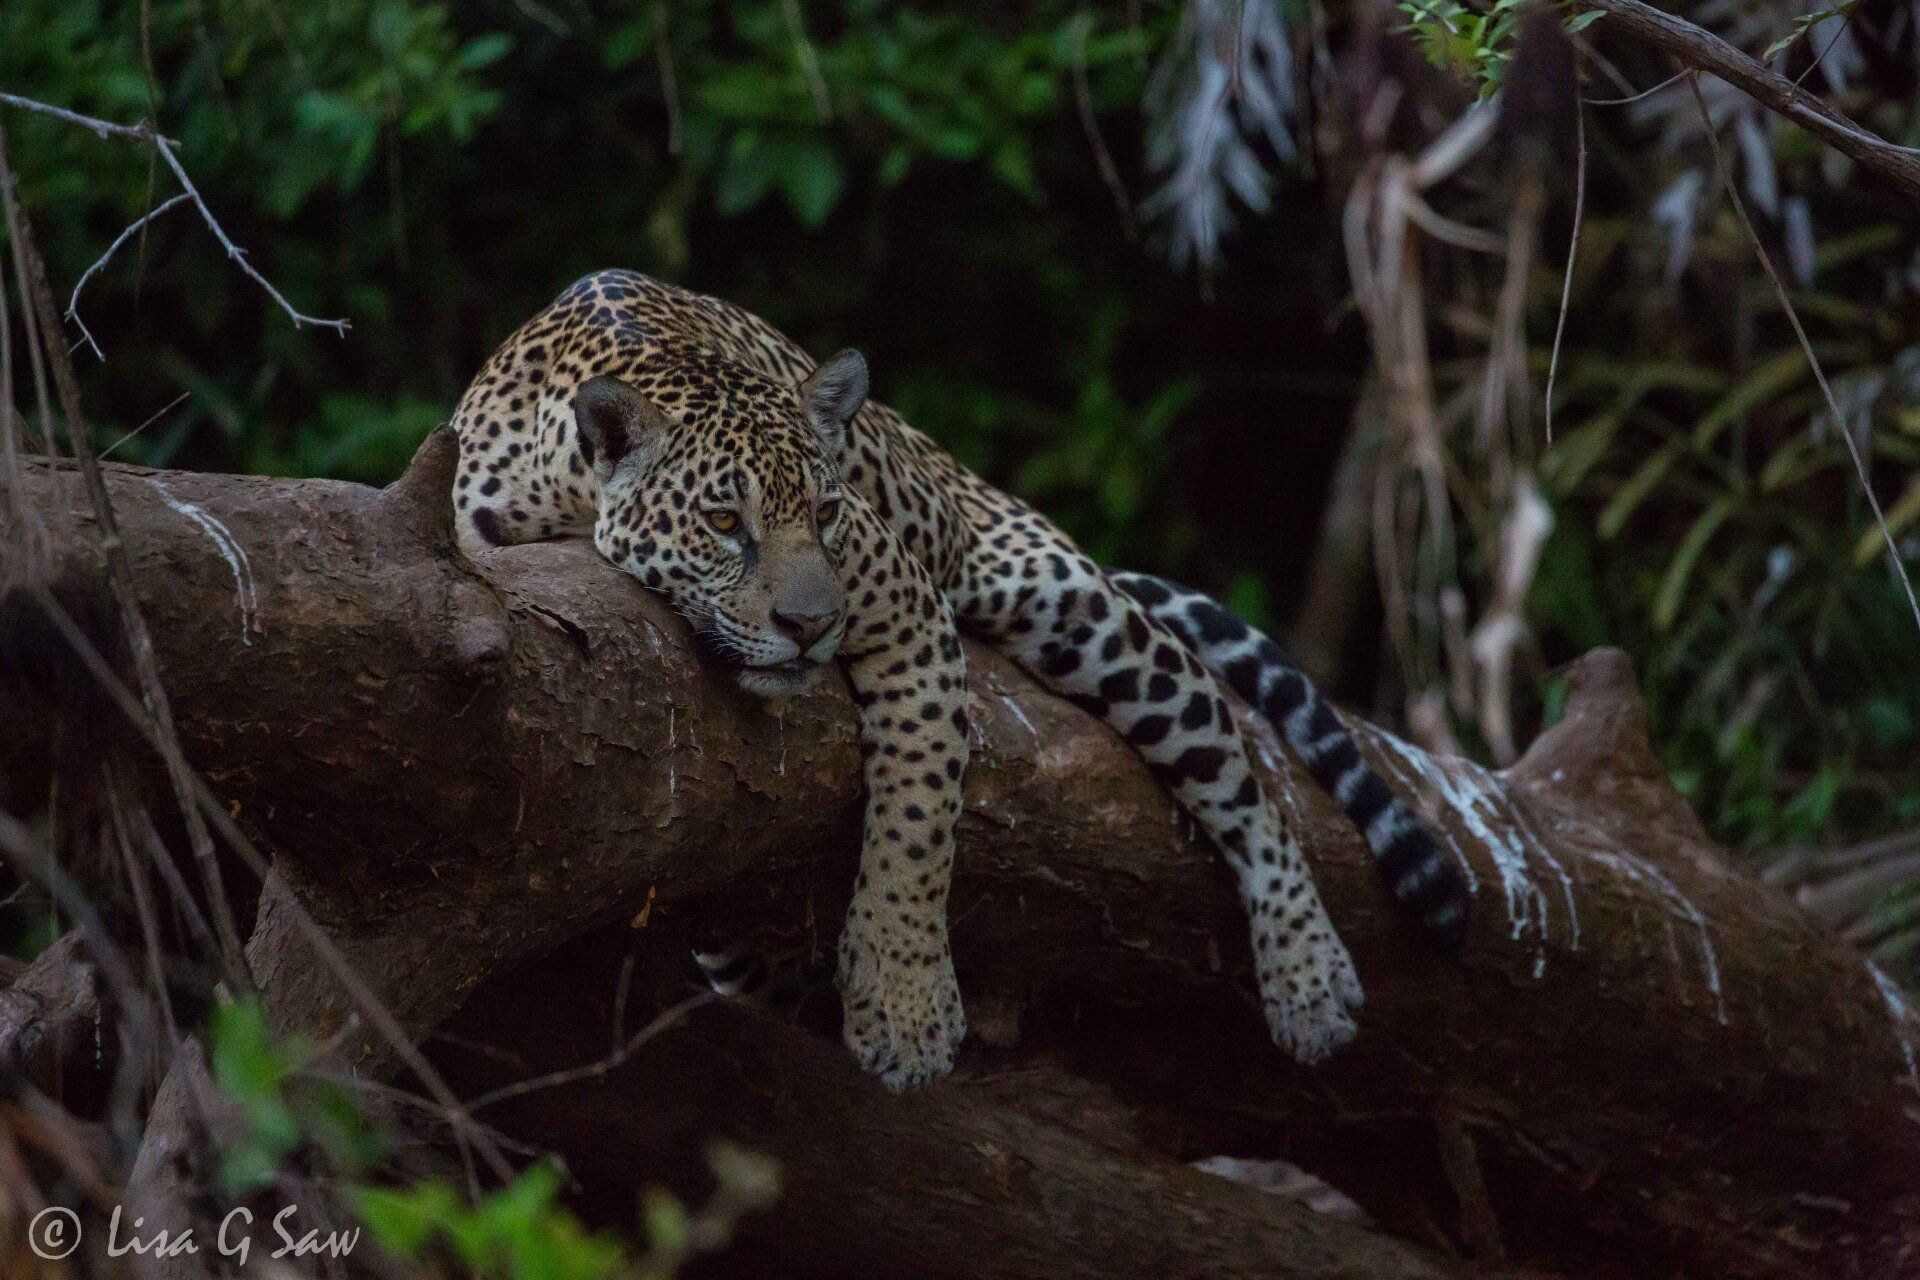 Jaguar lying down with legs draped over tree trunk